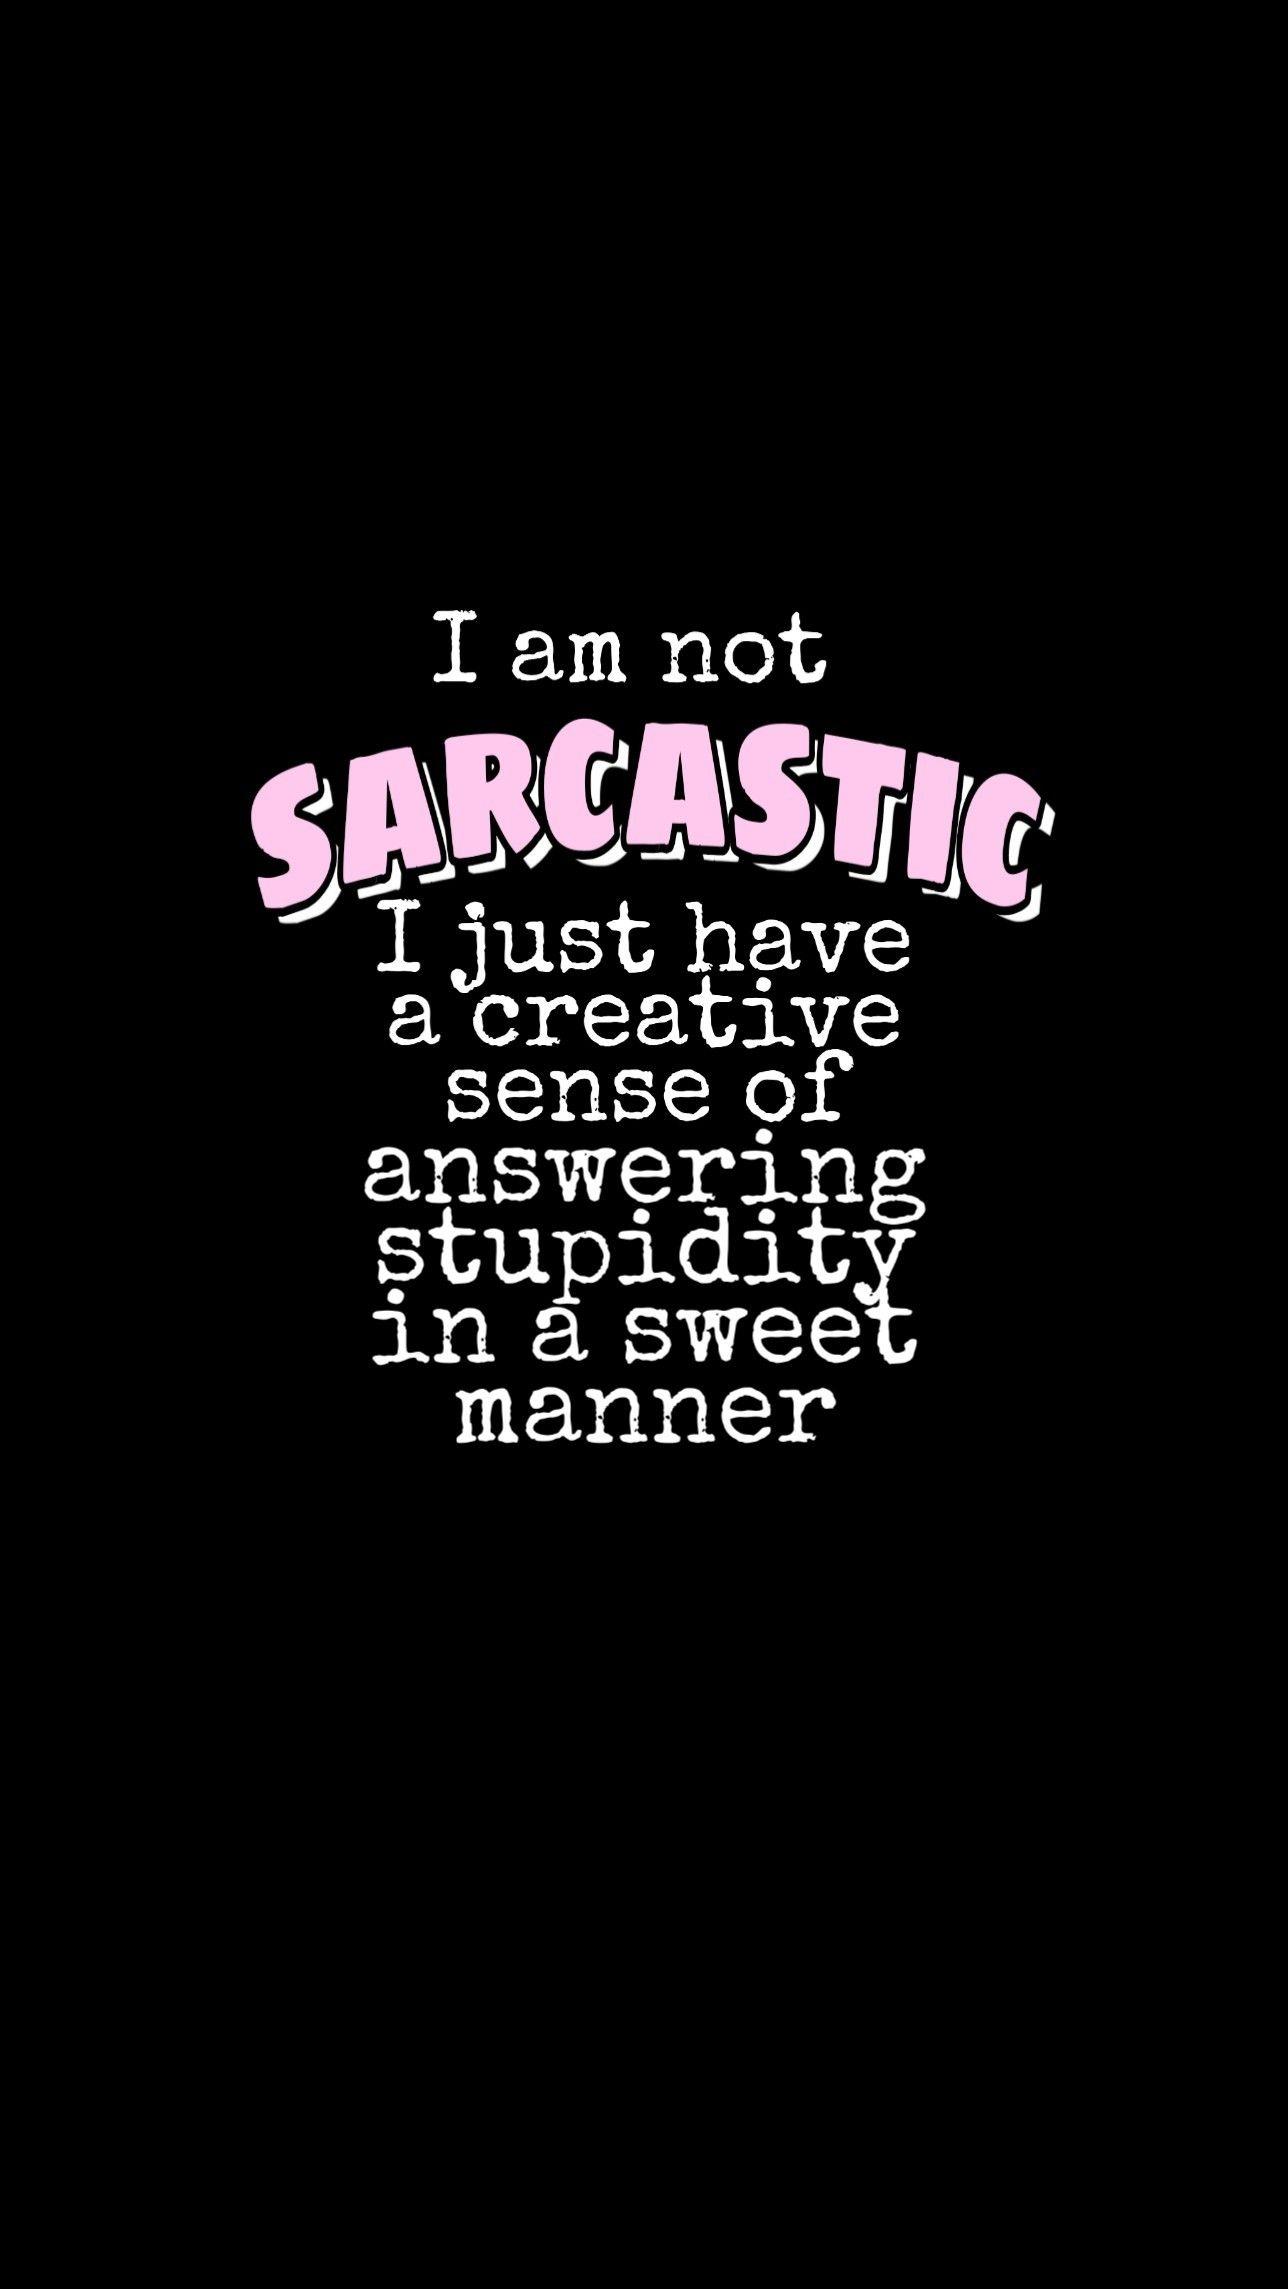 Sarcastic Quotes 40 Wallpapers  Quotefancy Collections